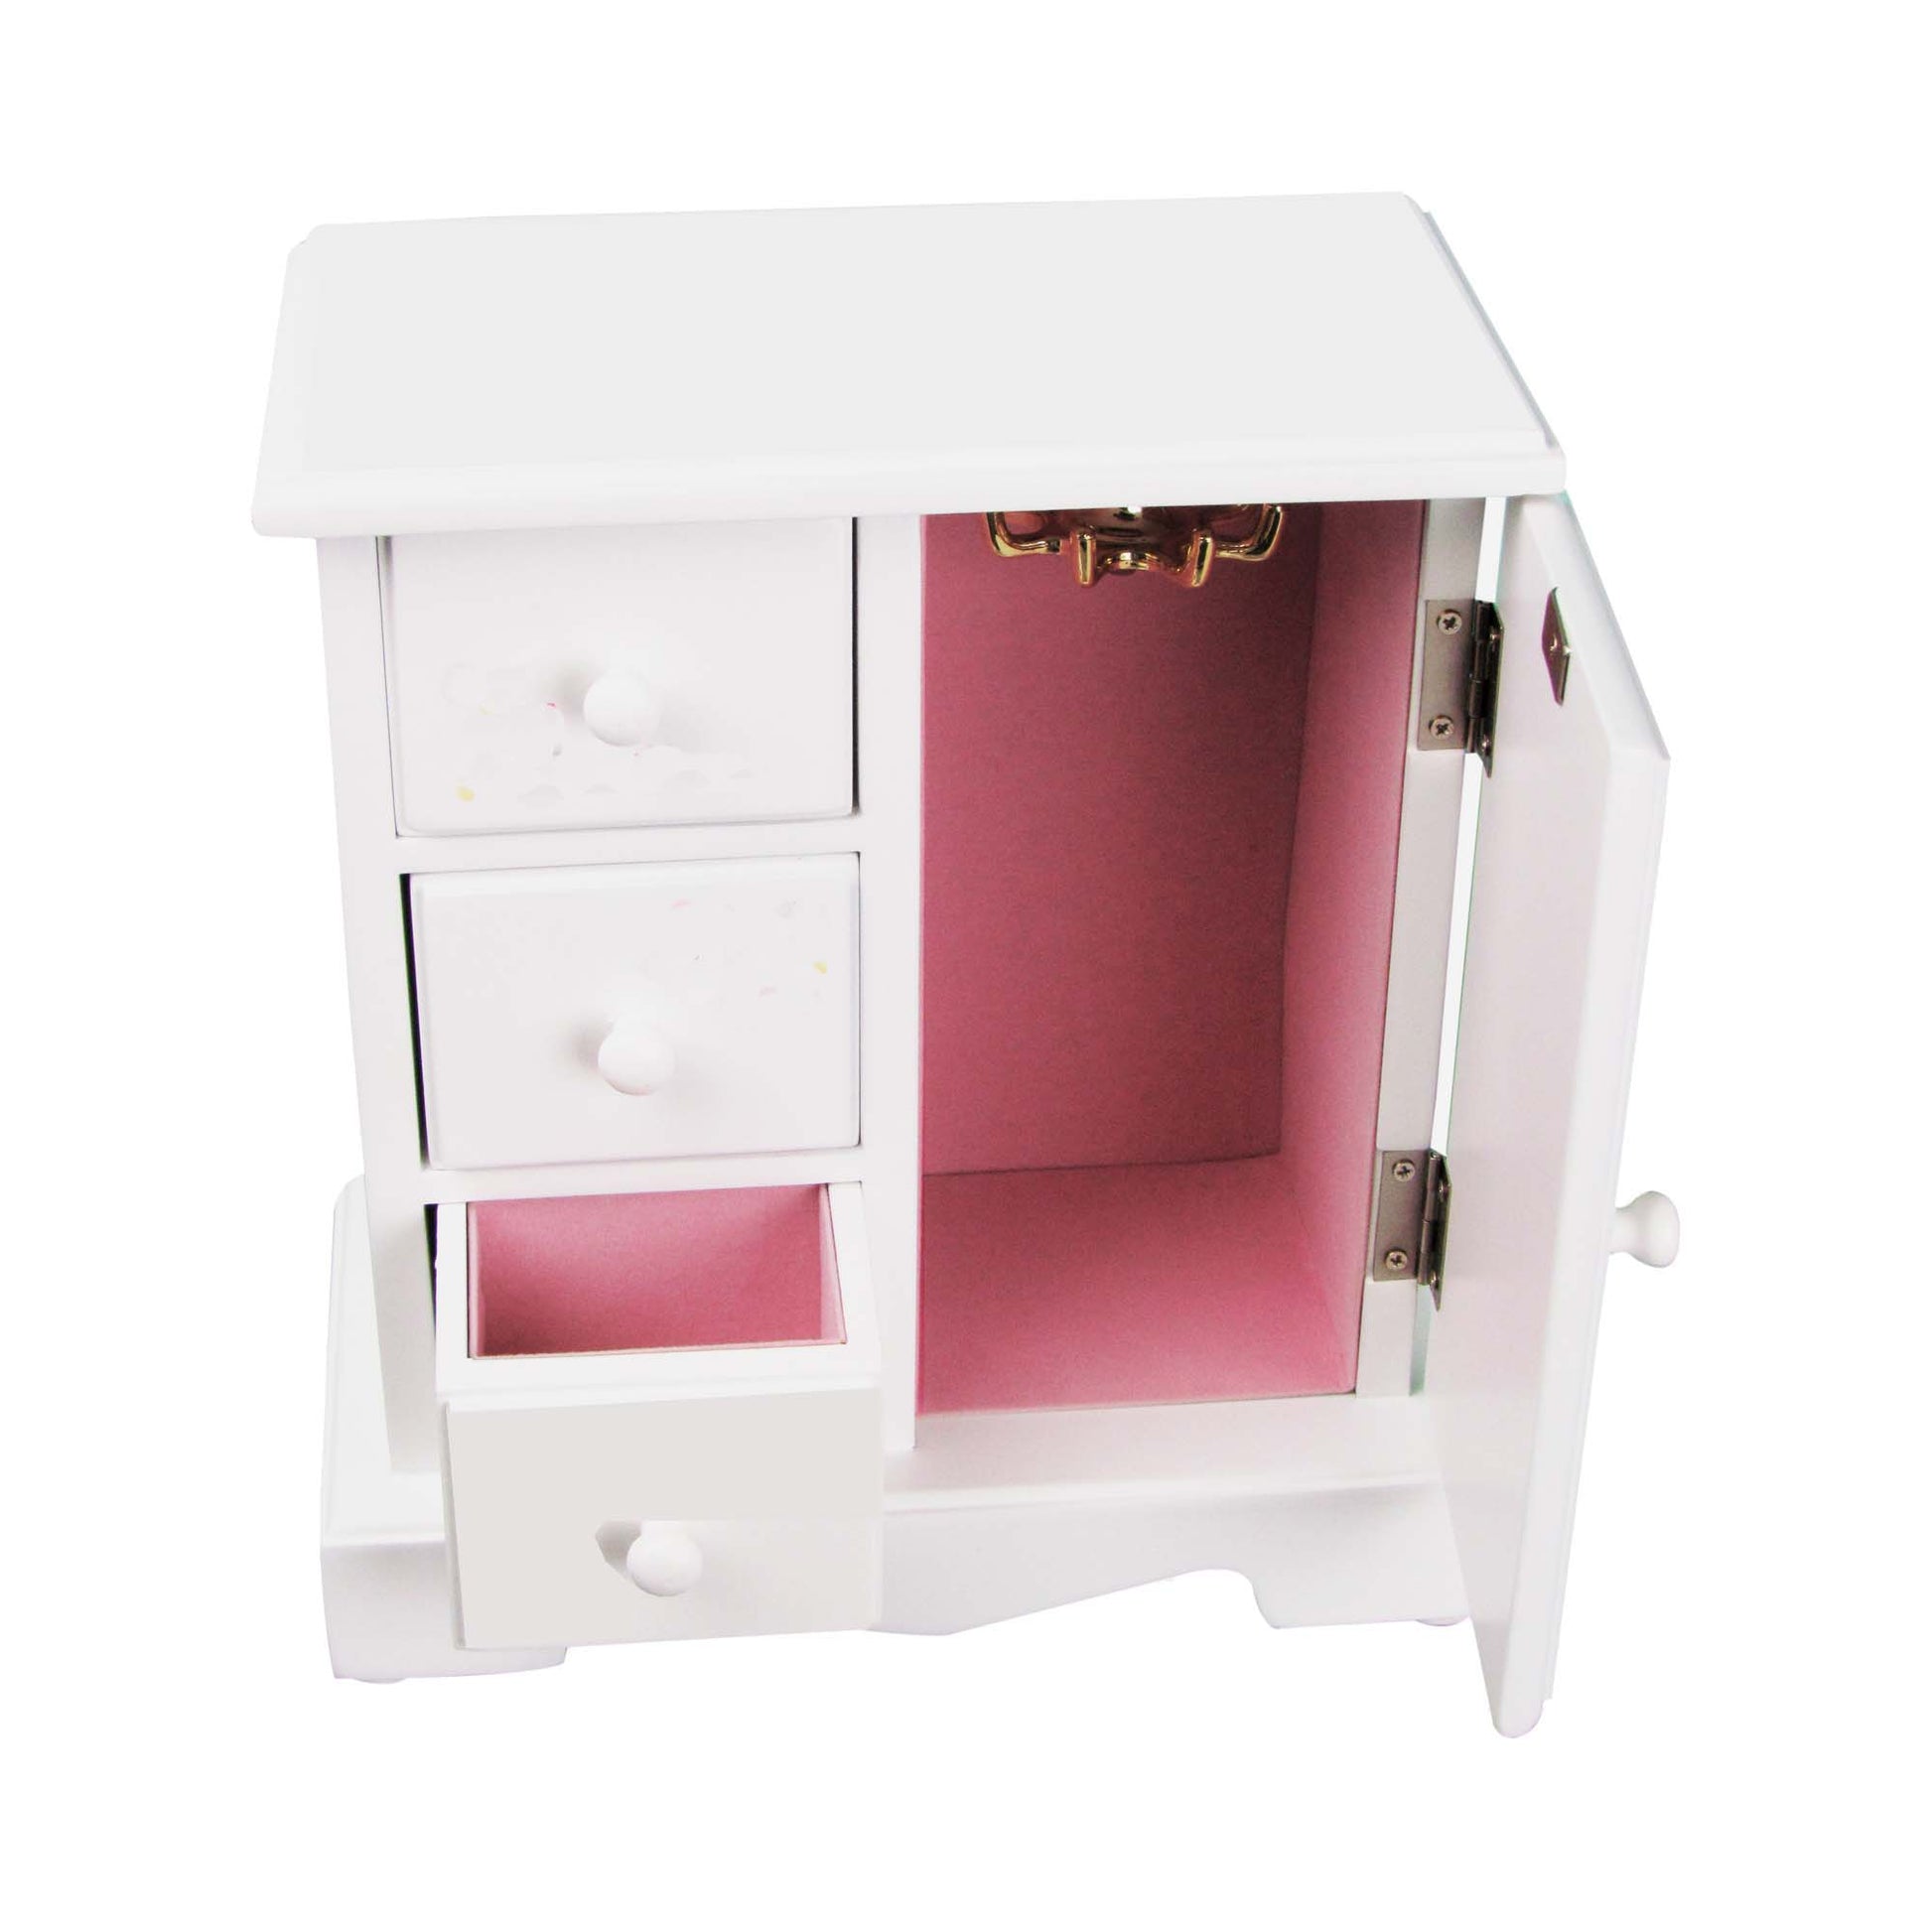 Personalized Jewelry Armoire with Pink Flamingo design